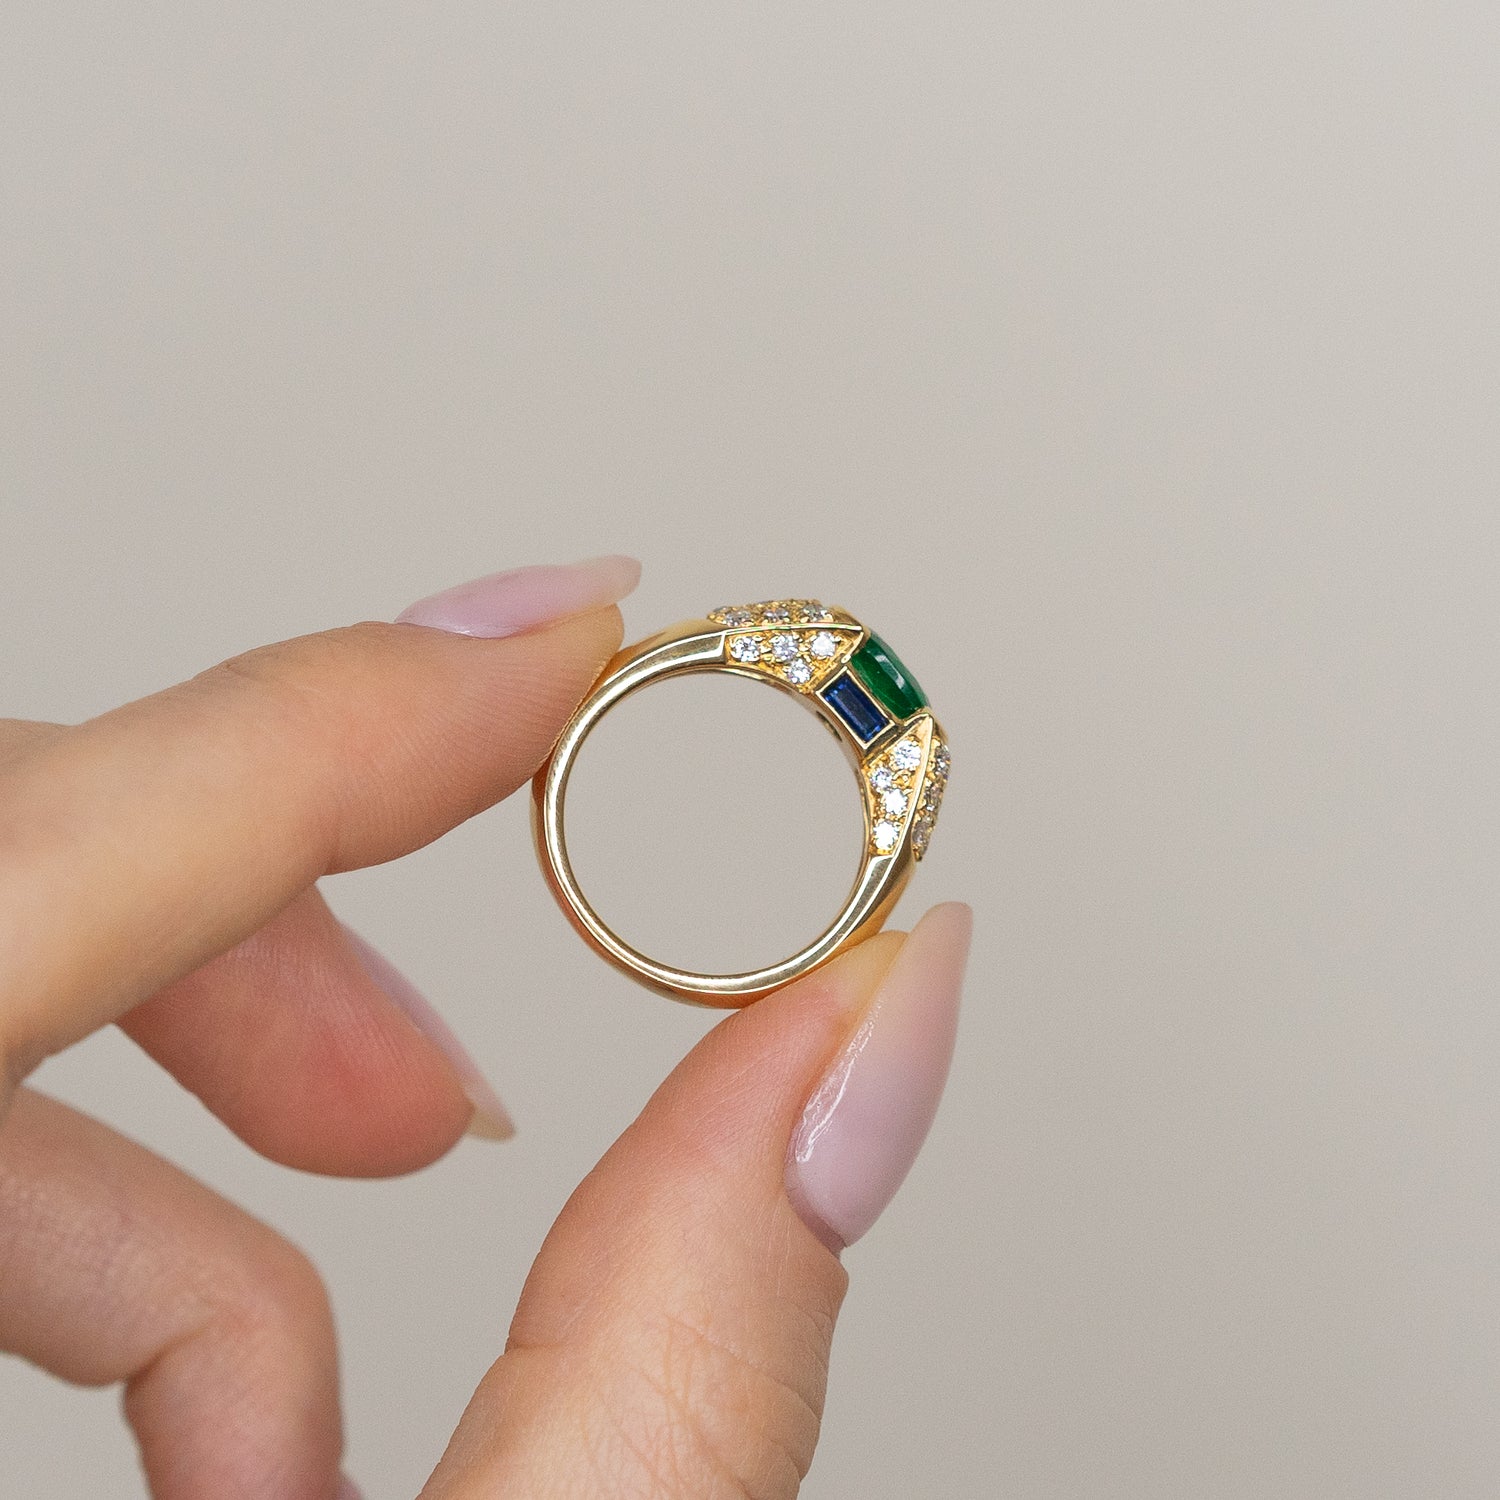 Gold ring with Emerald, Sapphire and Diamonds